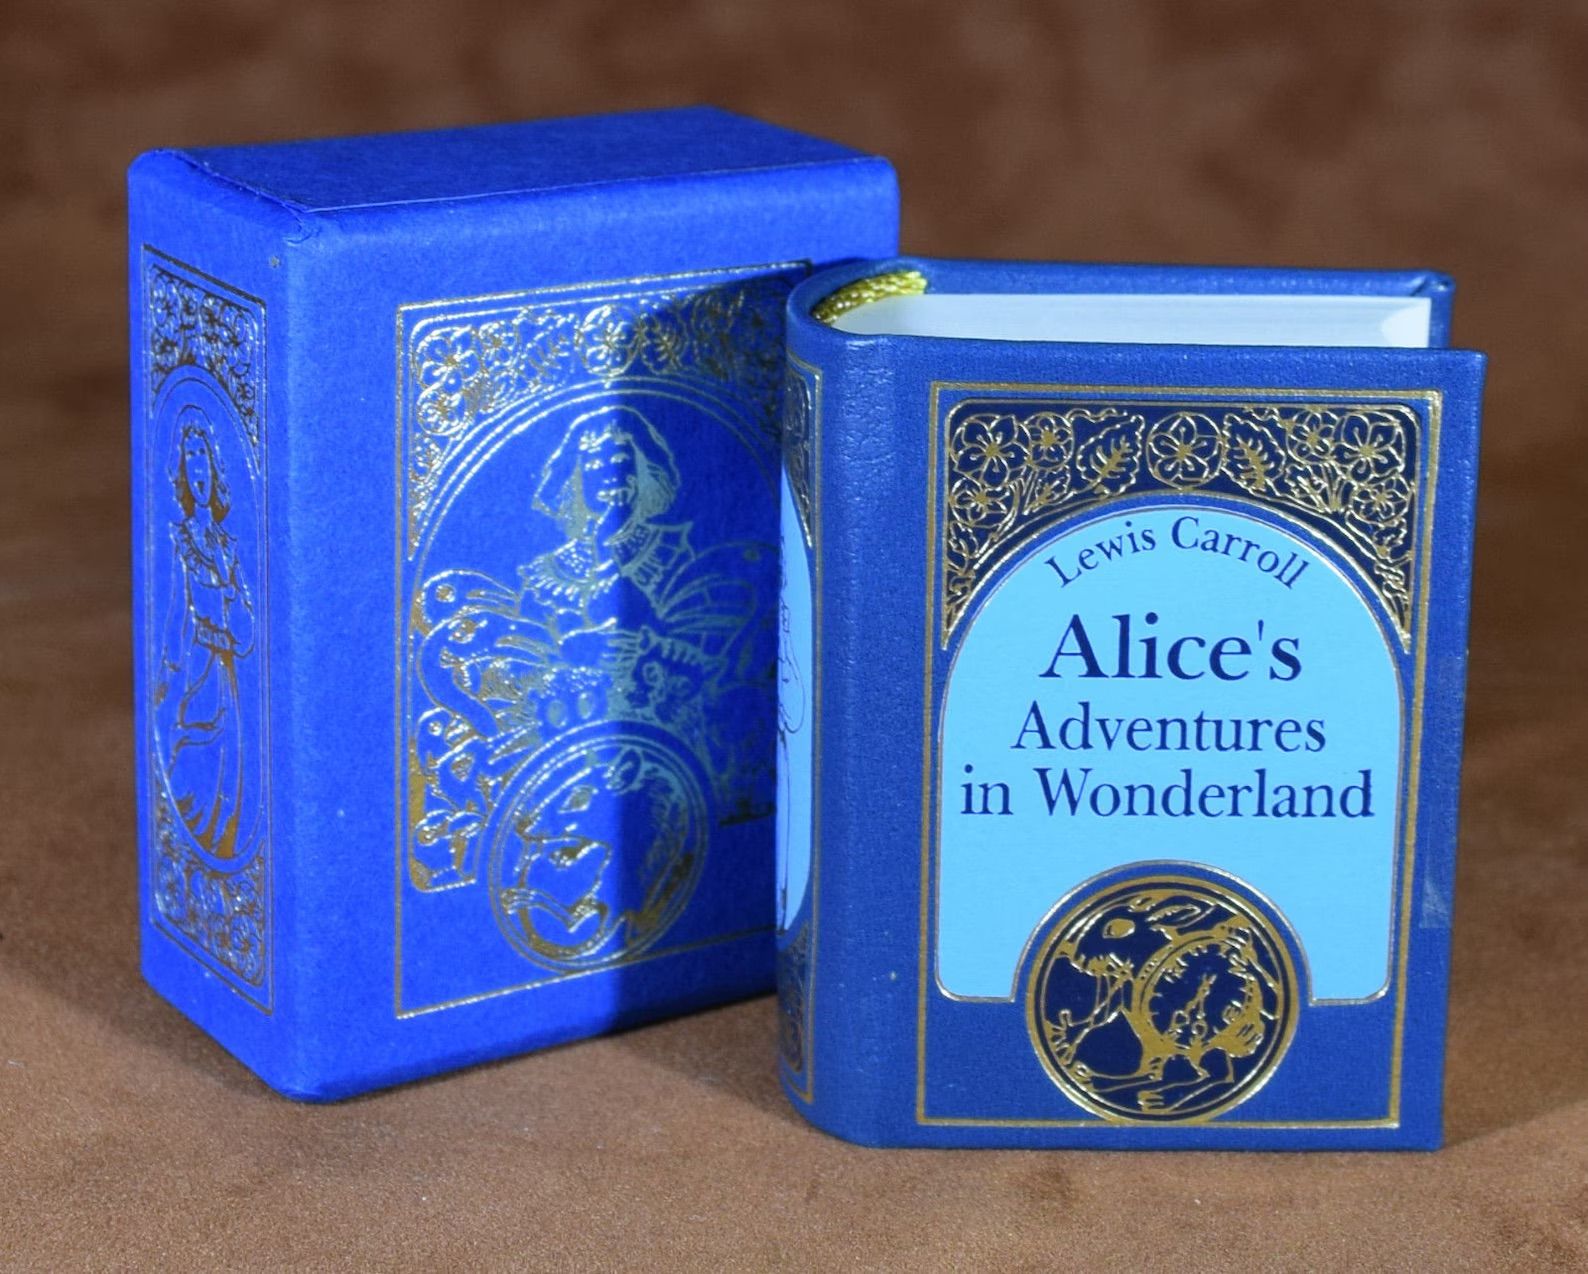 Alice's Adventures in Wonderland by Lewis Carroll Miniature Book and book cover